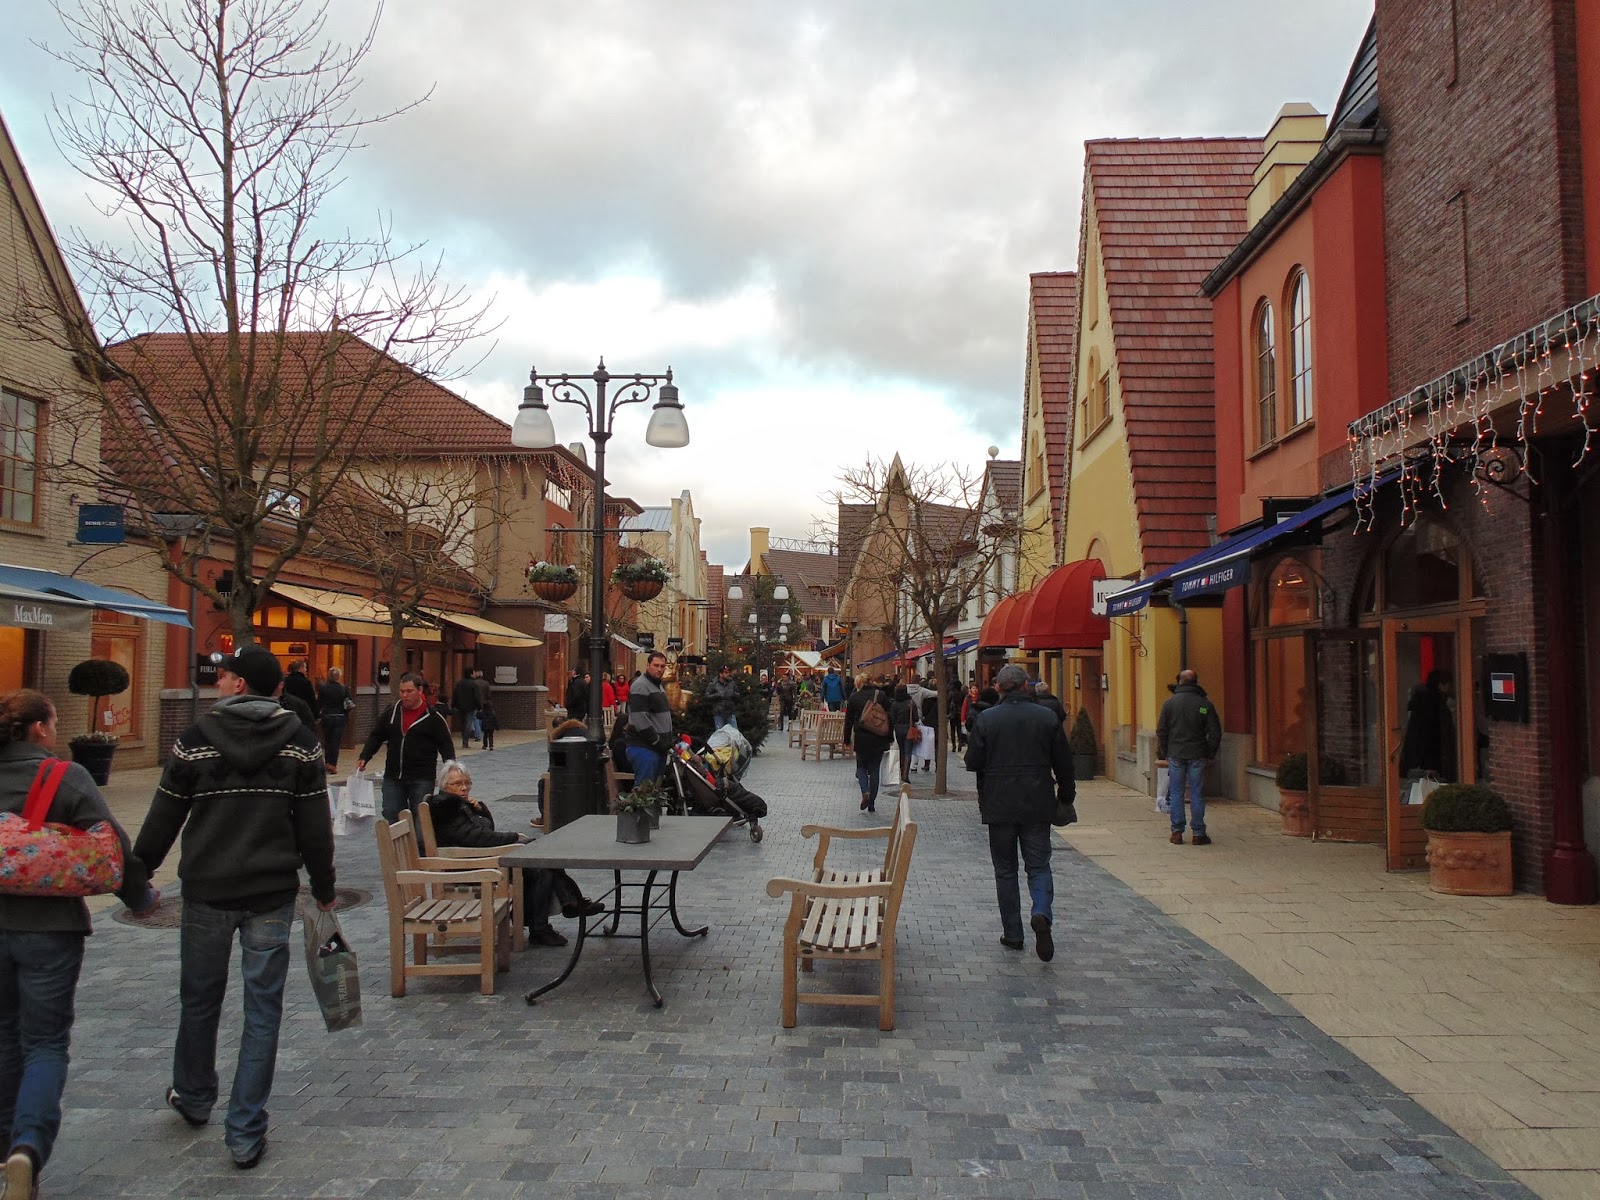 Maasmechelen Village - fashion outlet center | Life in Luxembourg